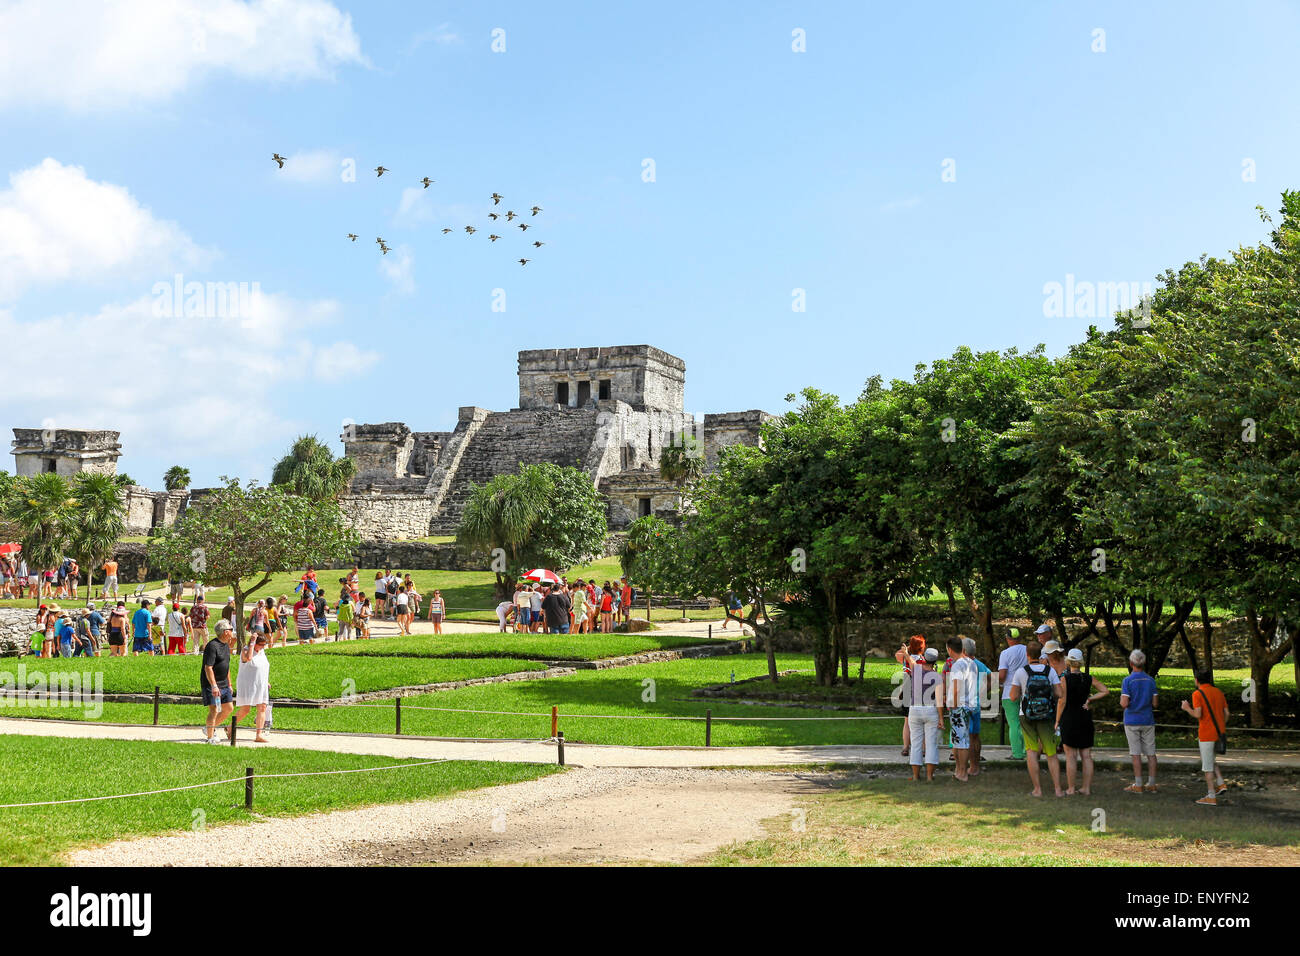 Tulum ruins the site of a Mayan ancient civilization walled city on the Yucatán Peninsula, Quintana Roo, Mexico Stock Photo